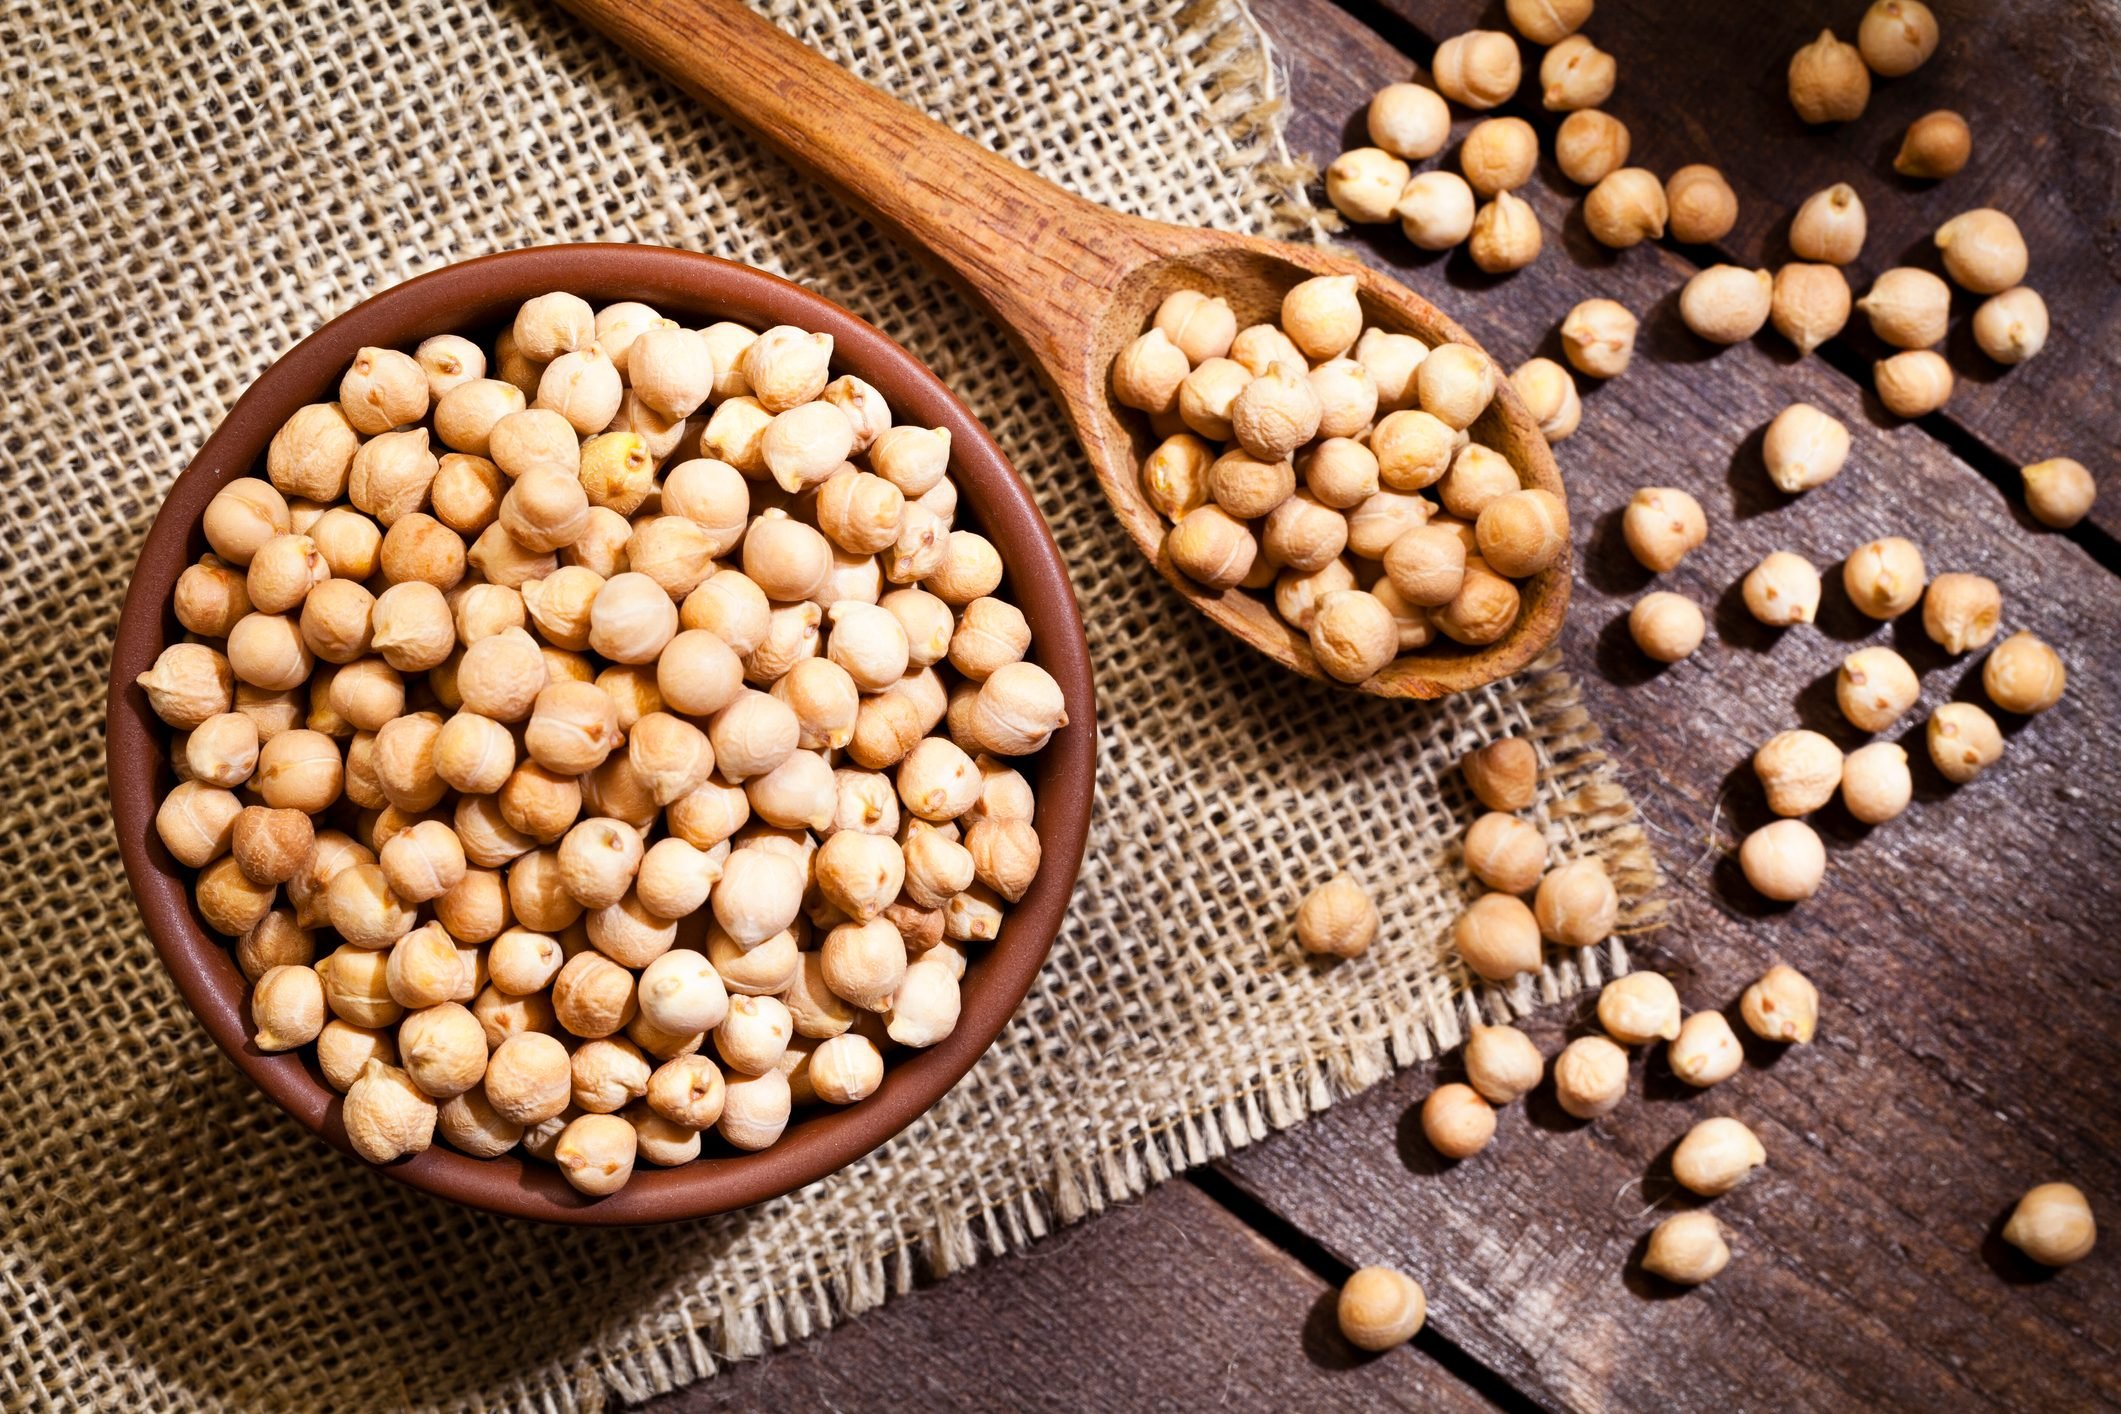 6 Chickpea Nutrition Facts You Should Know